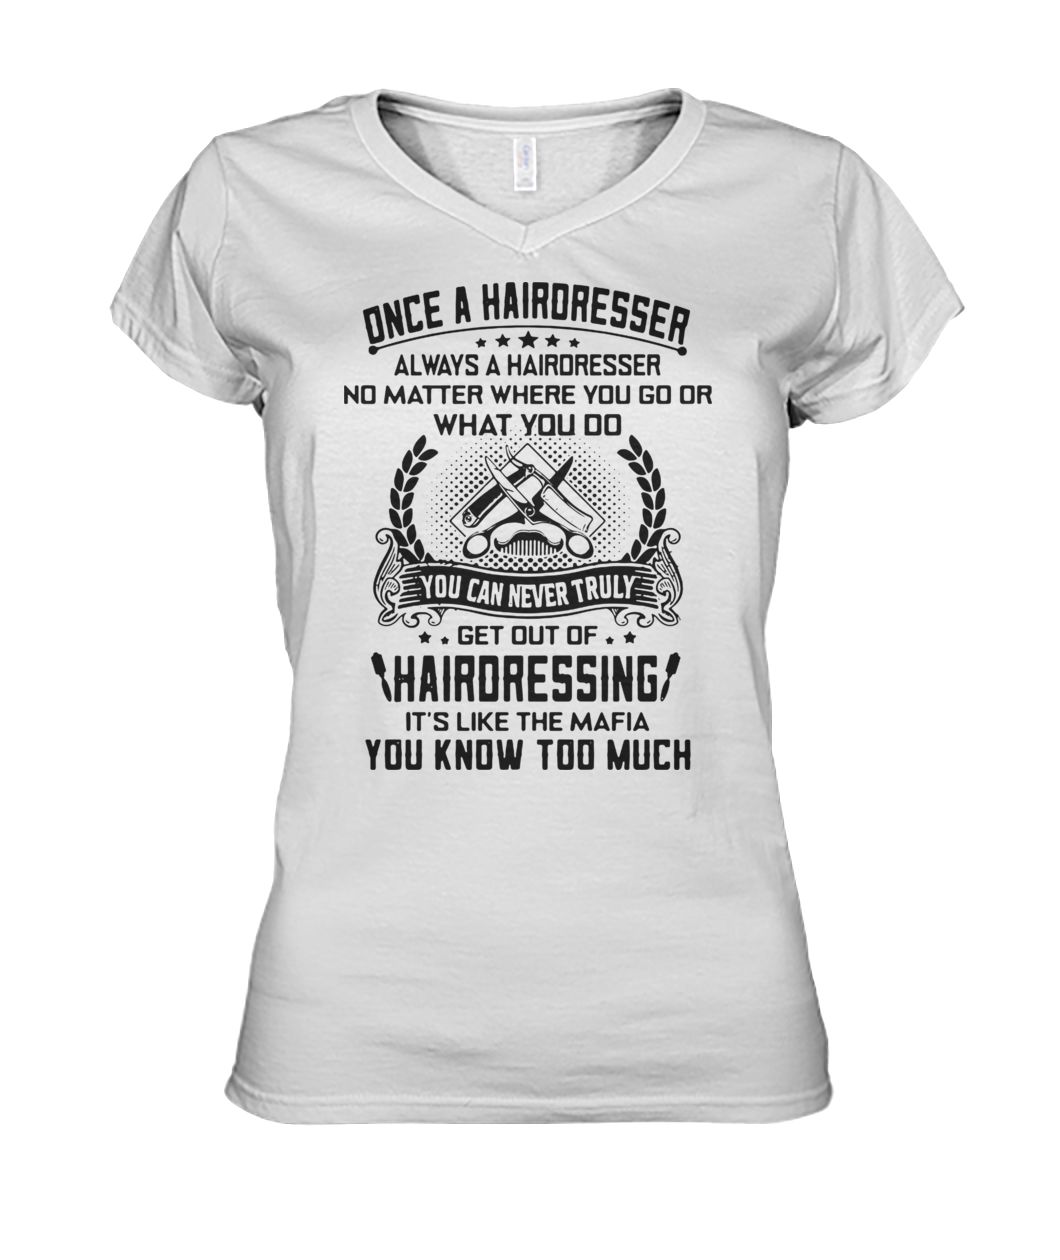 Once a hairdresser always a hairdresser no matter where you go or what you do you women's v-neck